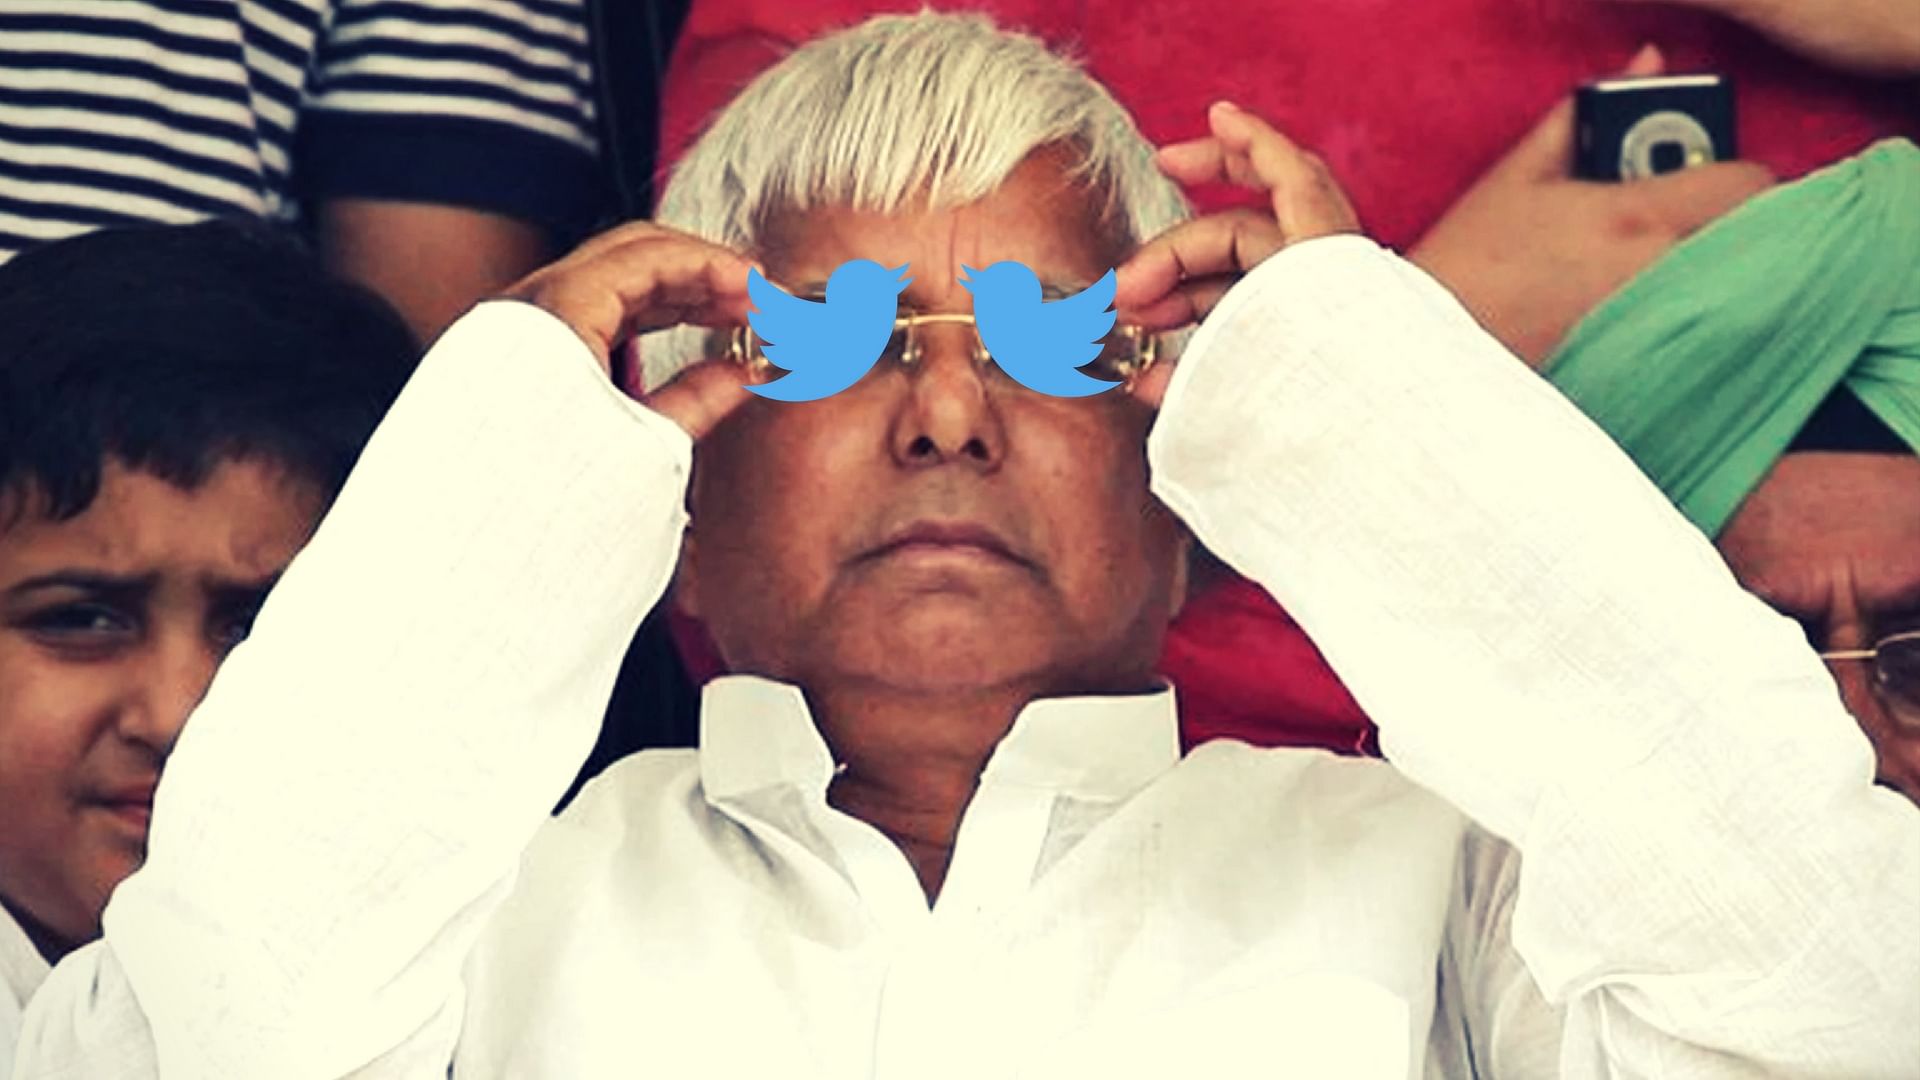 RJD chief Lalu Prasad Yadav took Twitter by storm post his conviction in another fodder scam case.